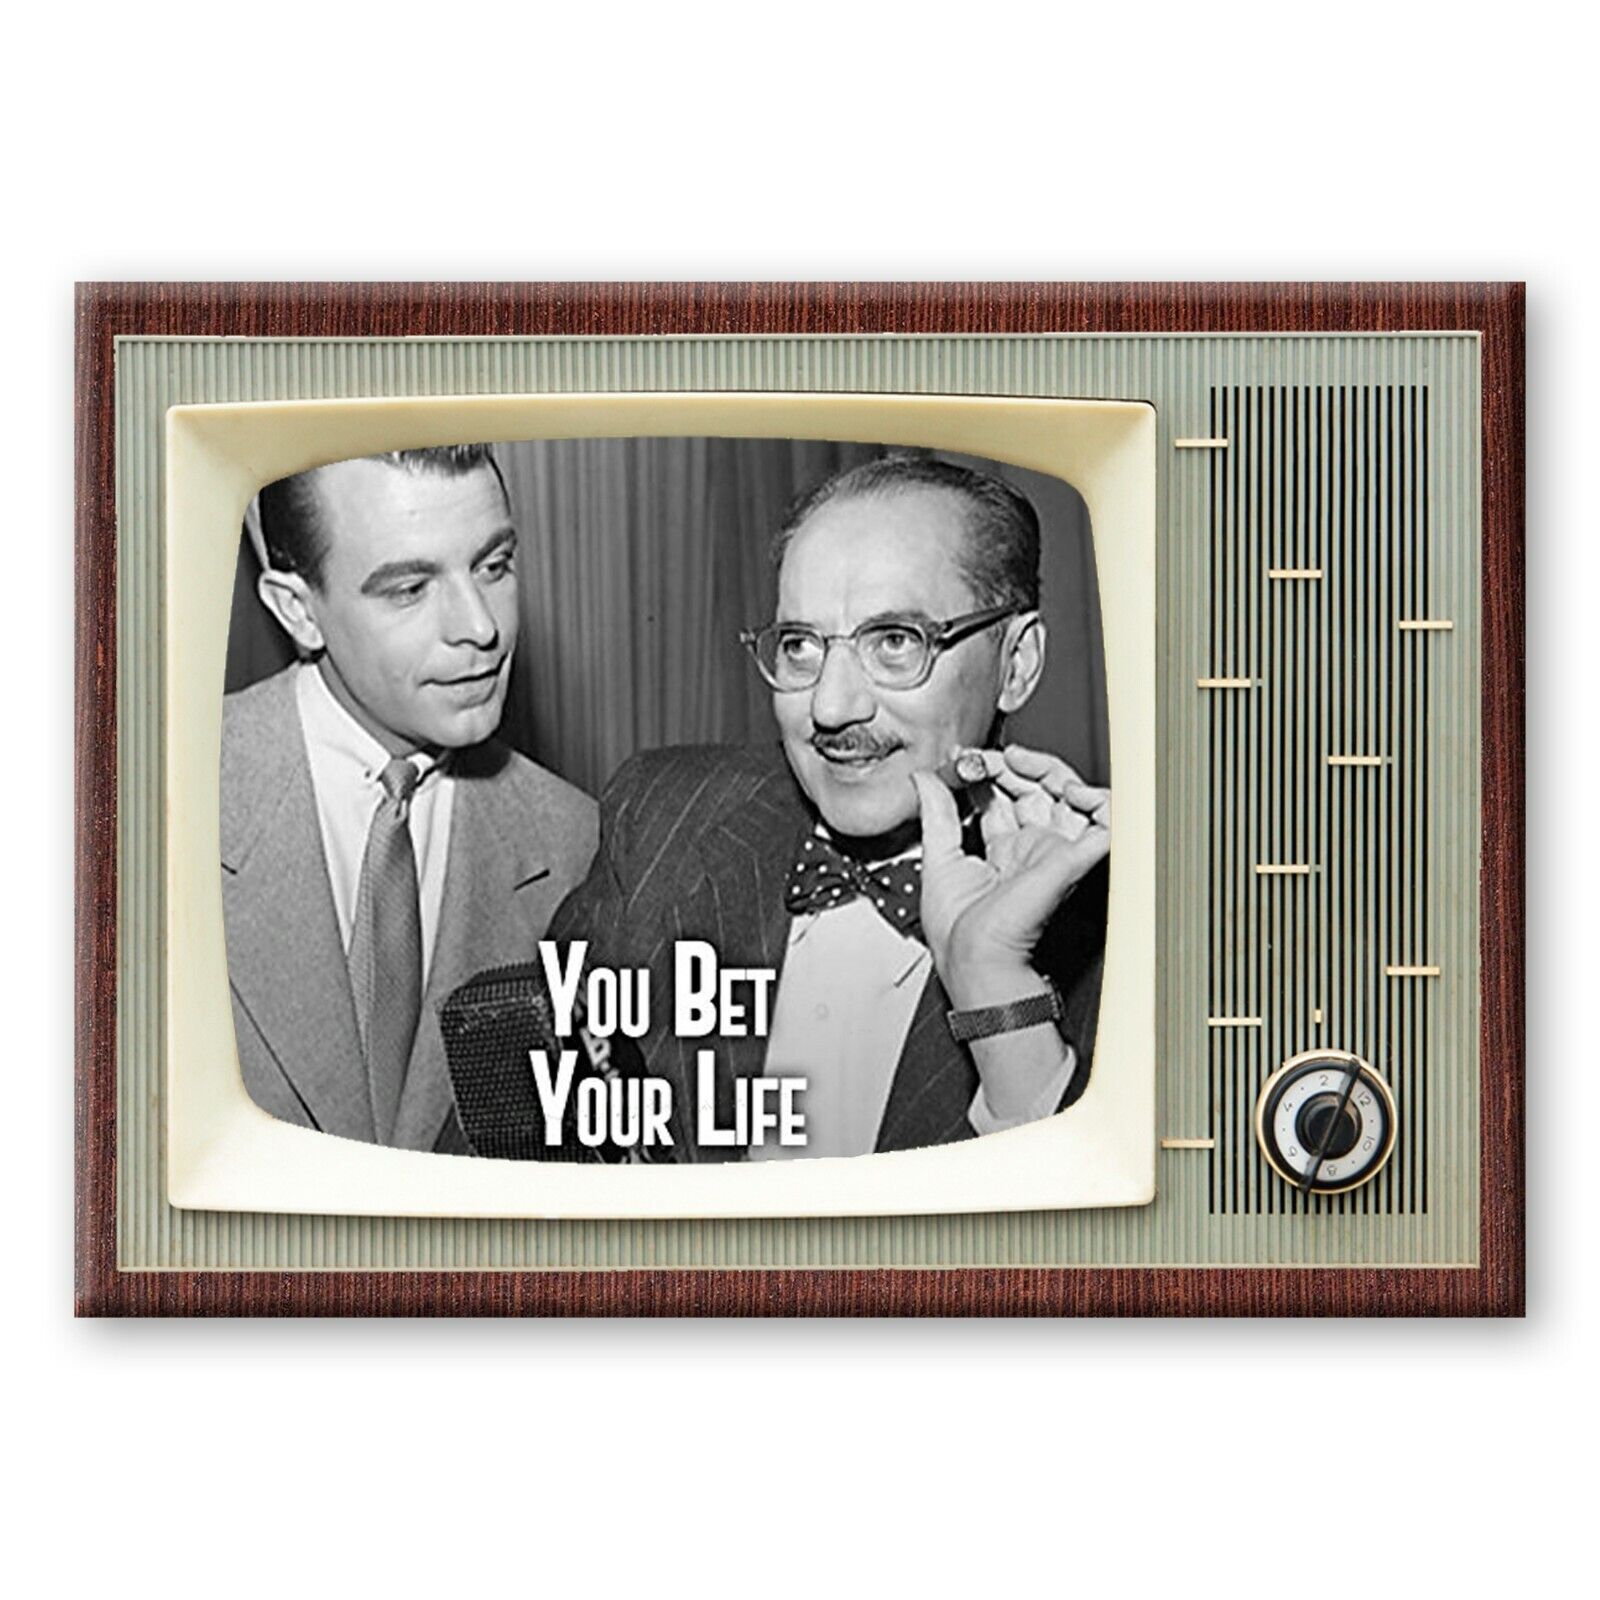 YOU BET YOUR LIFE TV Show Classic TV 3.5 inches x 2.5 inches FRIDGE MAGNET